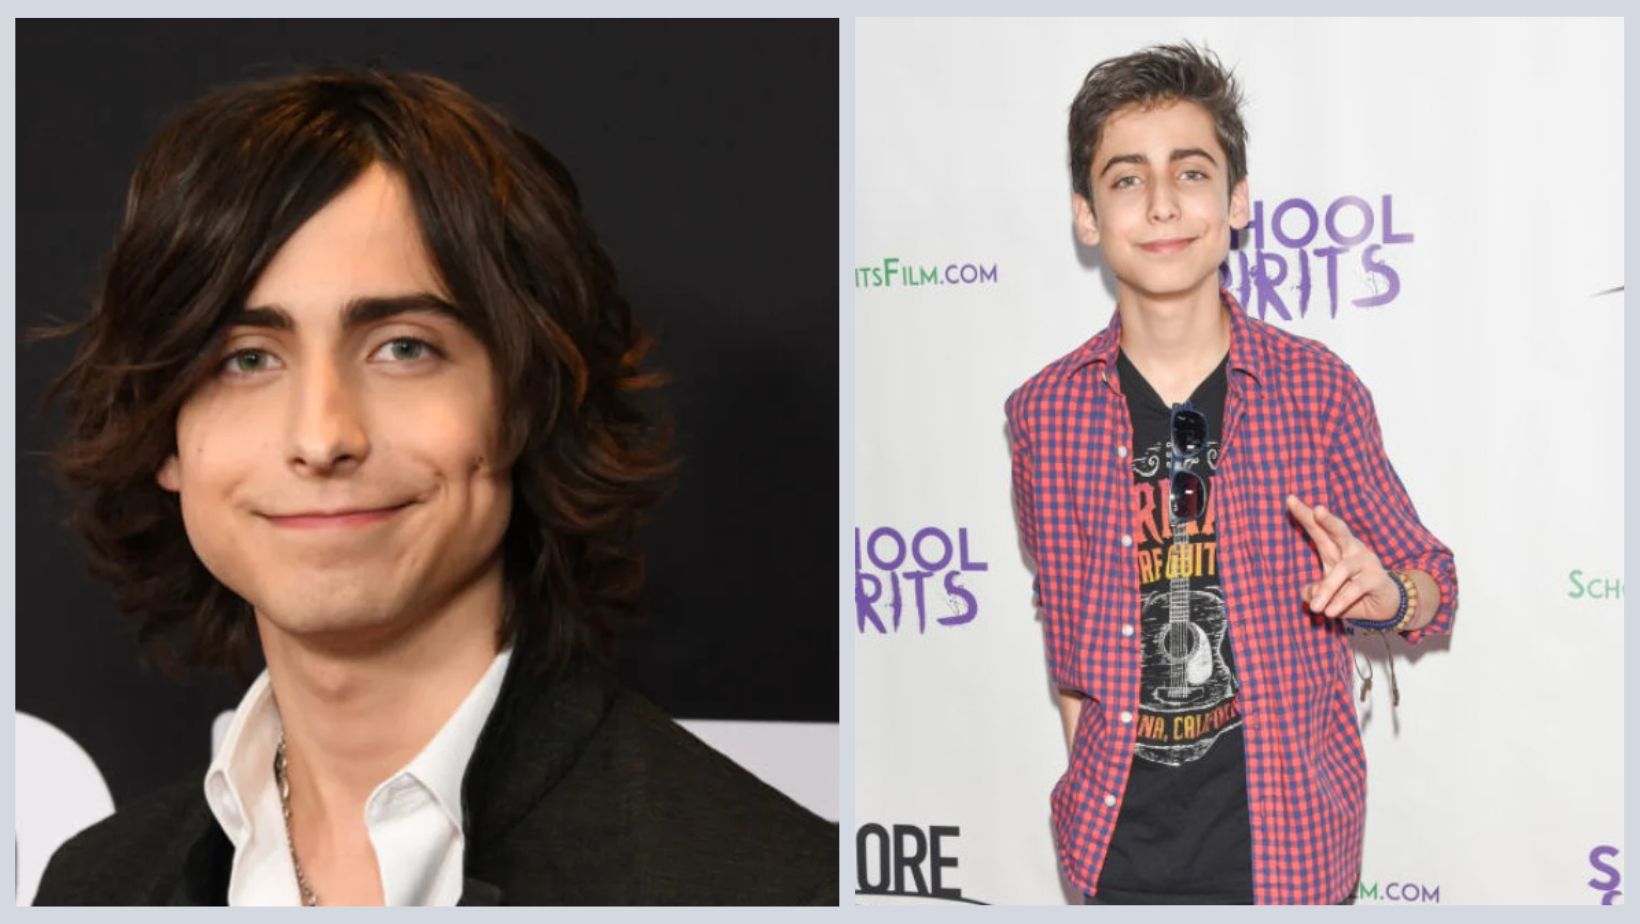 Who Are Aidan Gallagher Siblings?